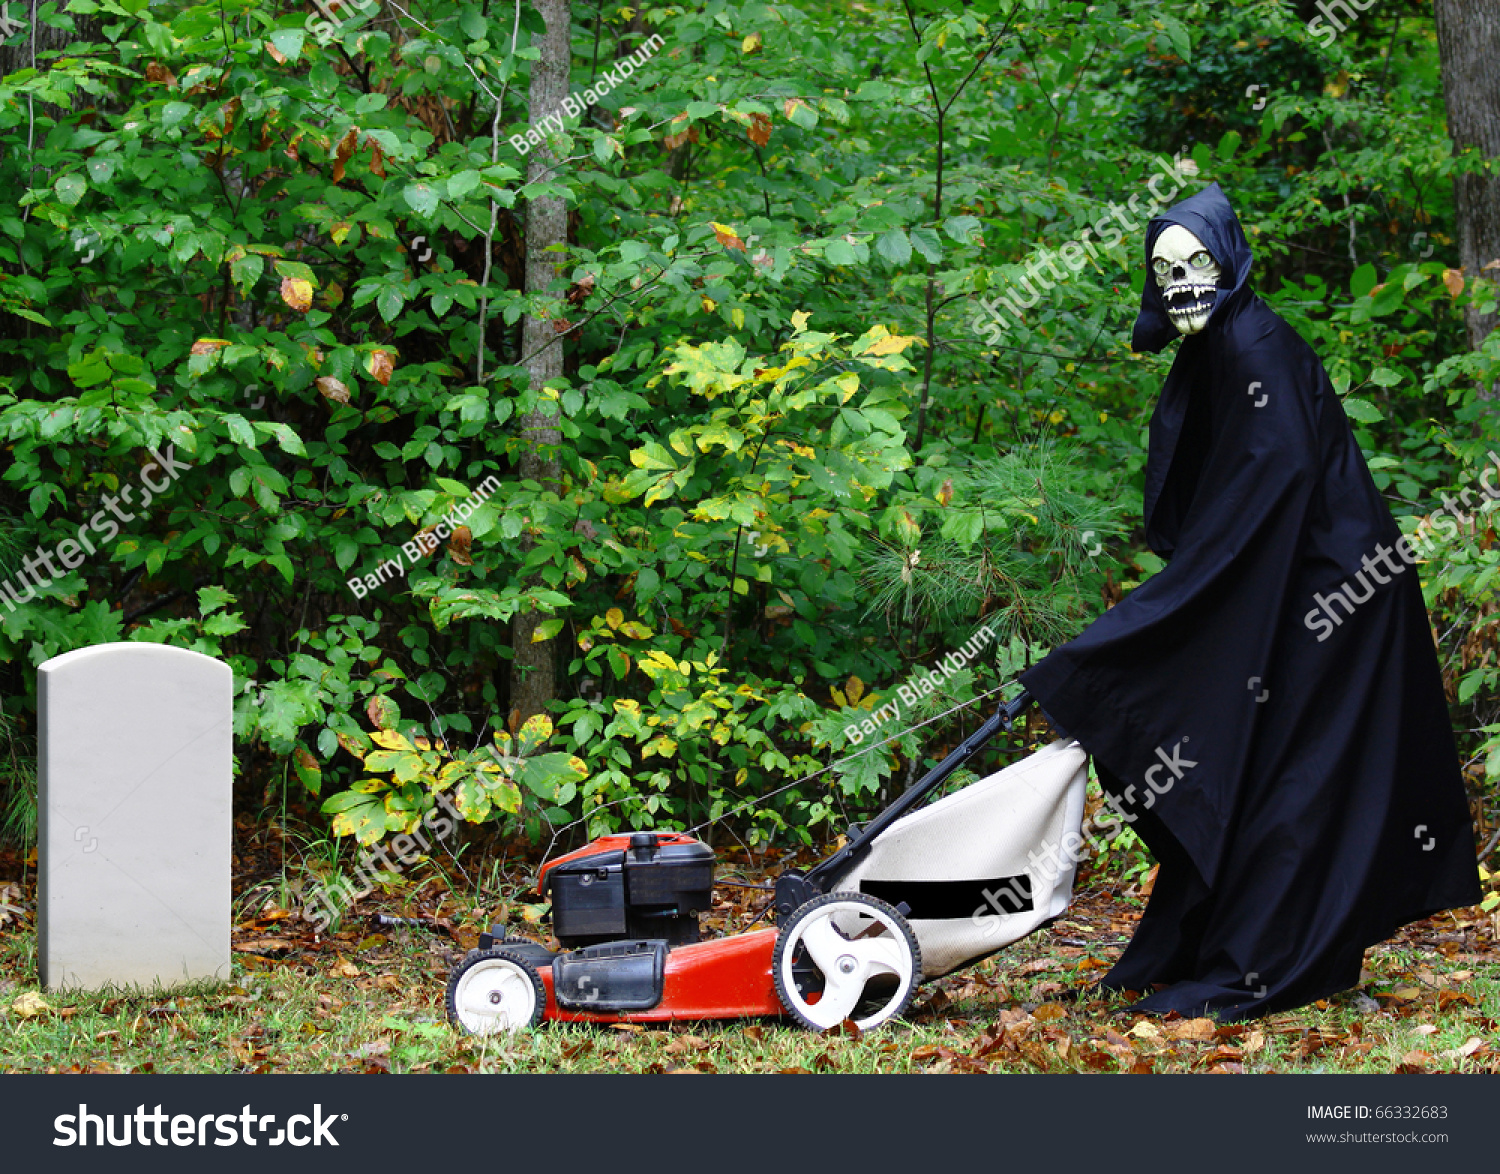 stock-photo-the-grim-reaper-mowing-the-l